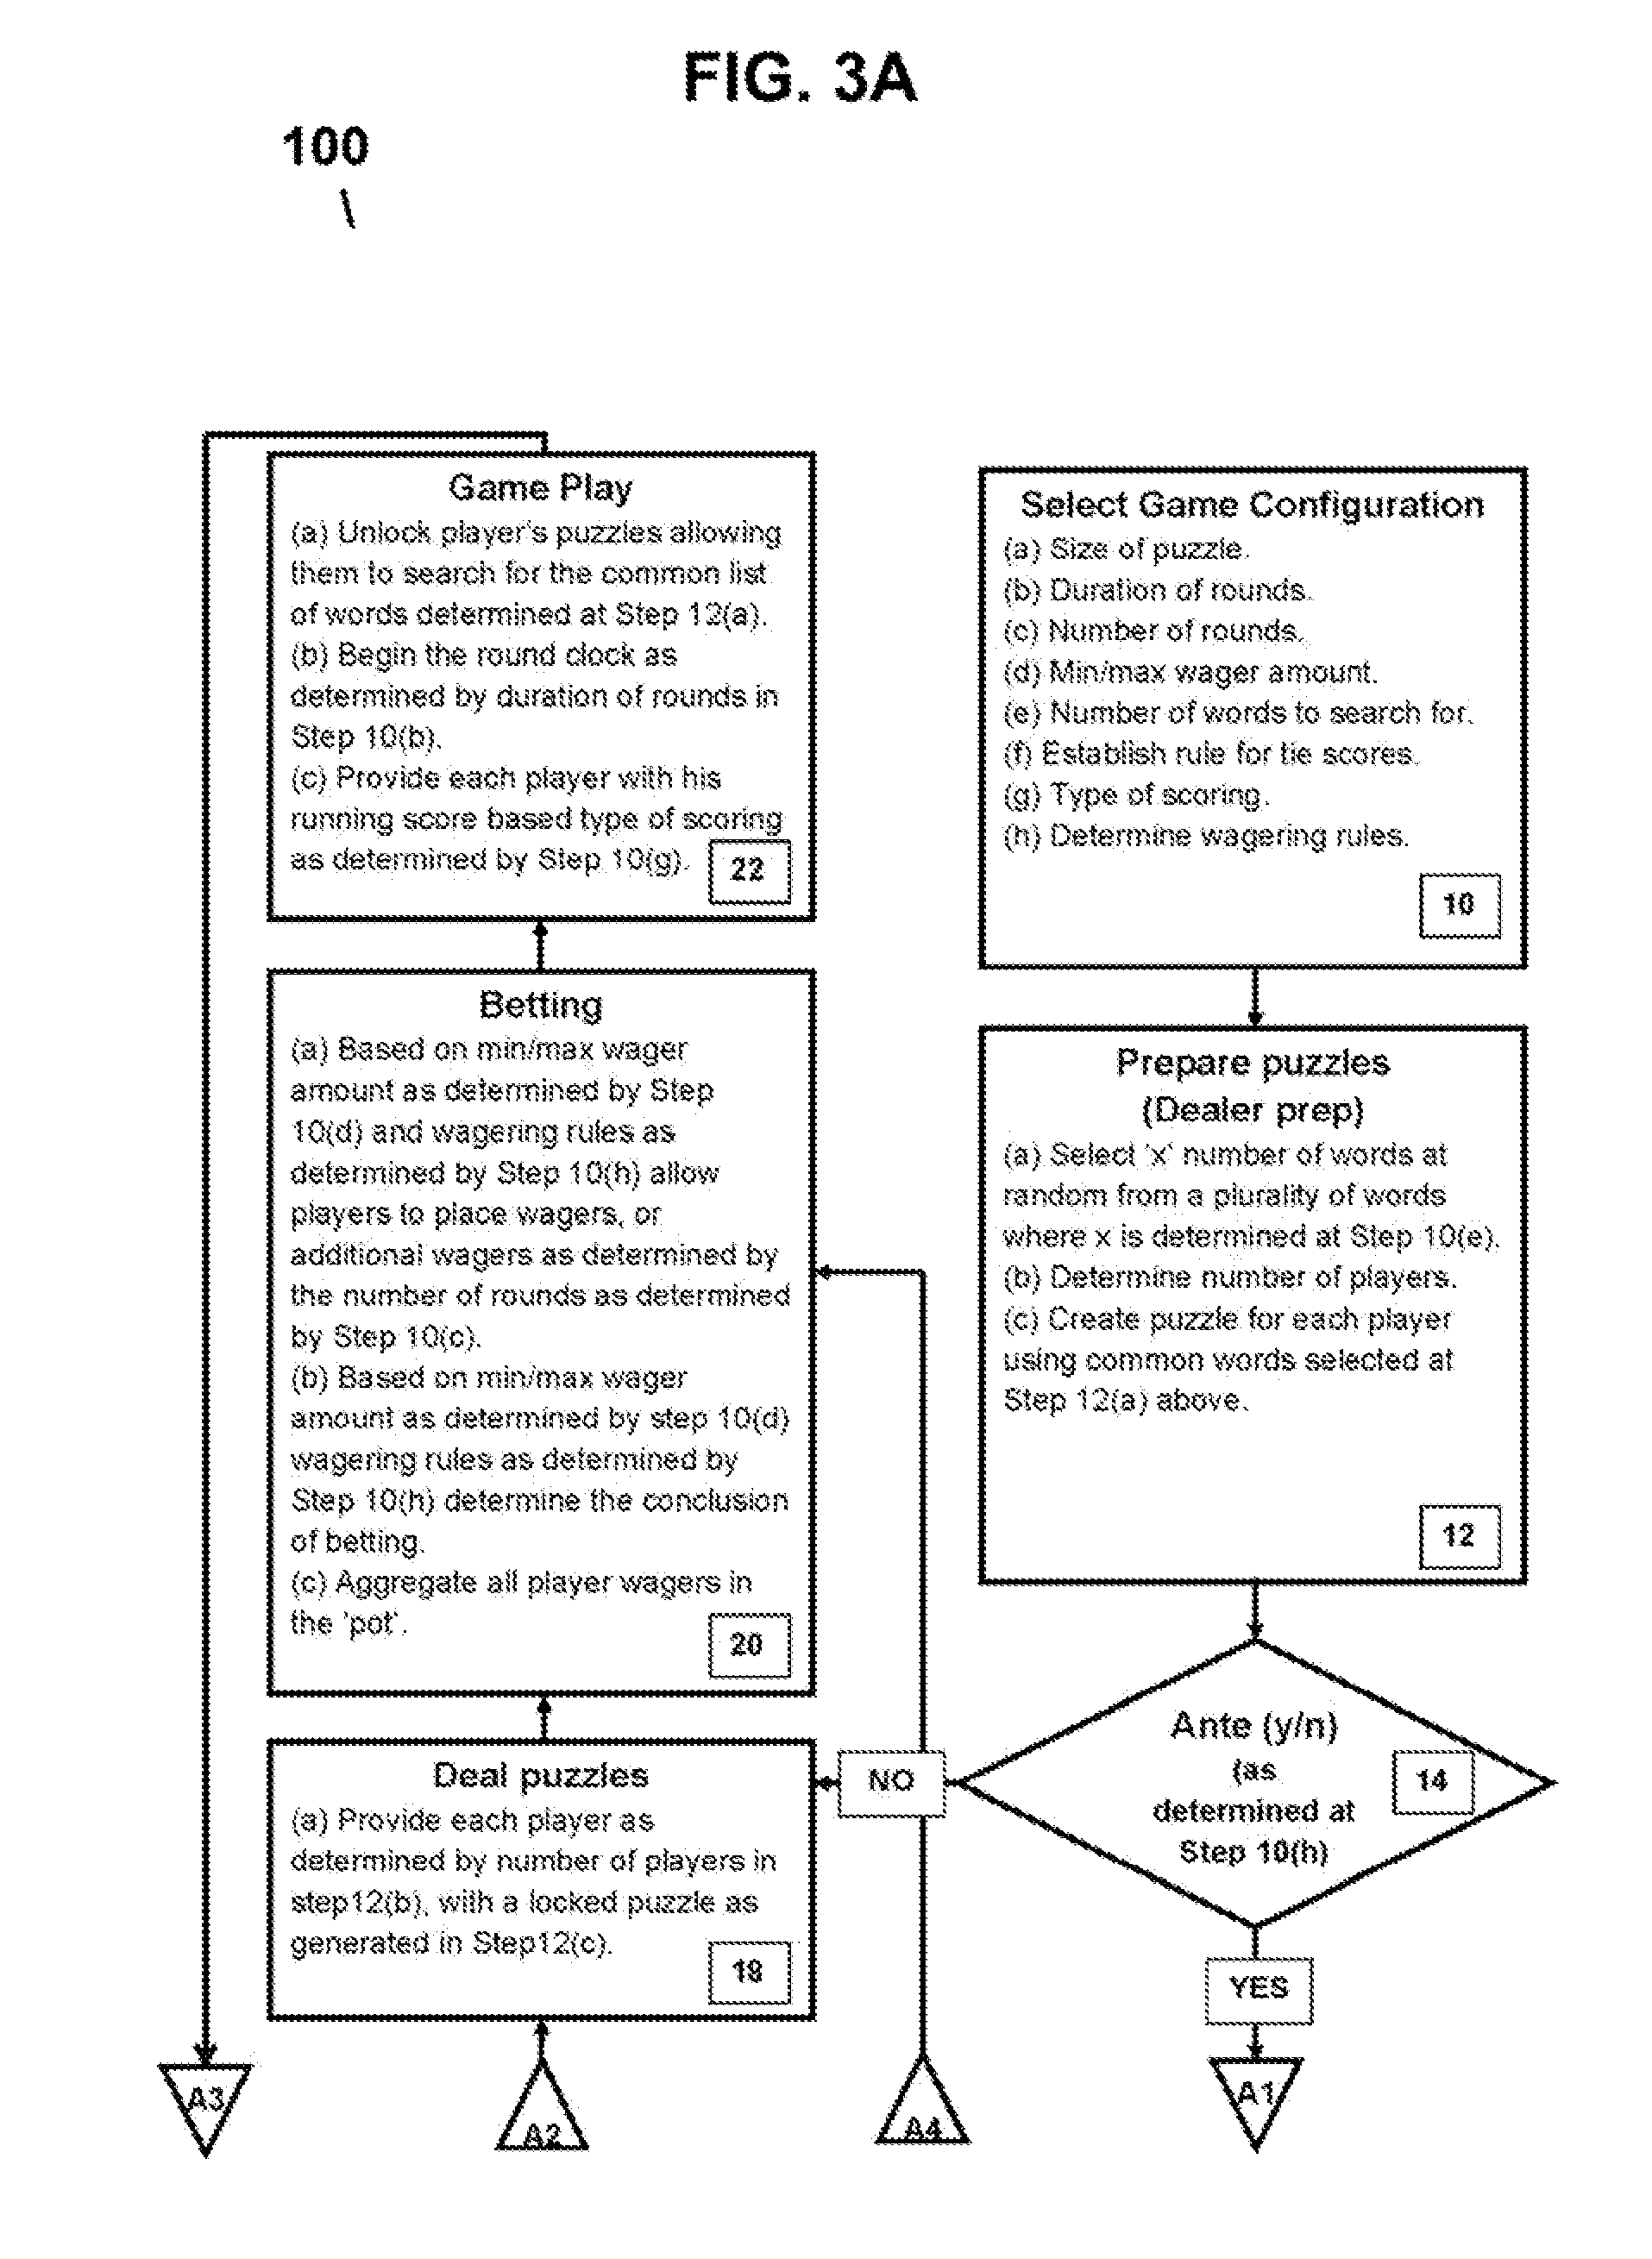 System and method for providing and managing a competitive puzzle-based game having at least one risk element and at least one advertising element